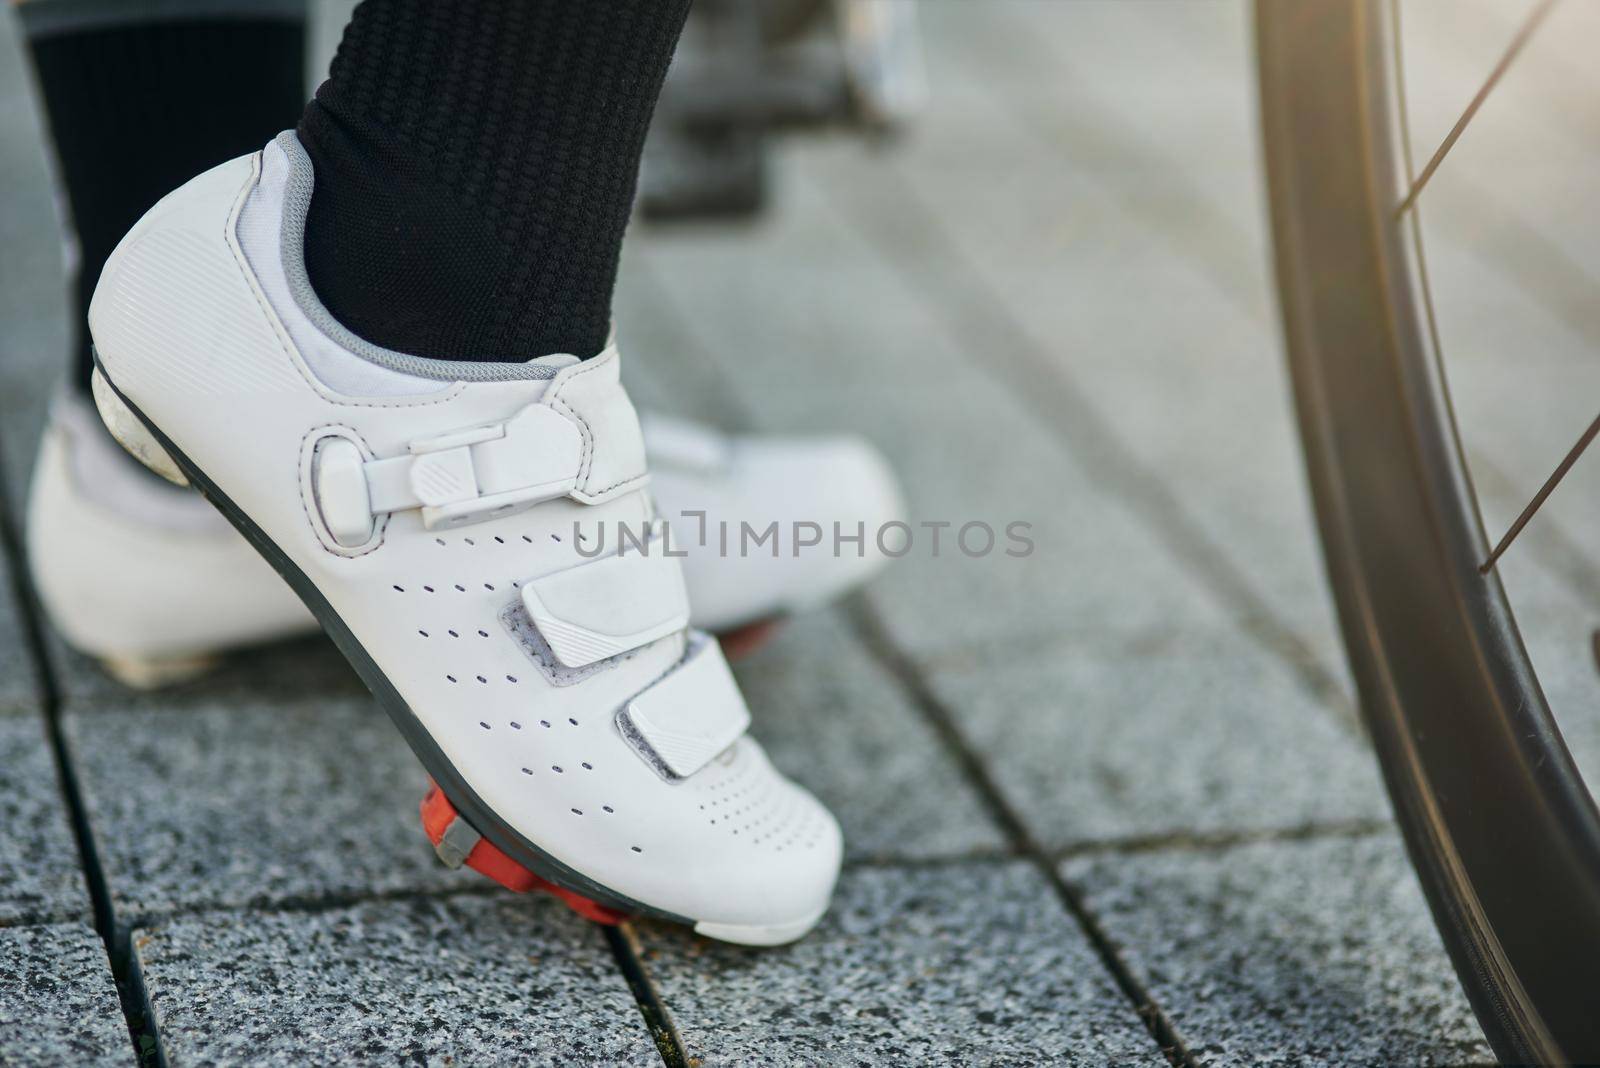 Close up shot of legs of female cyclist wearing cycling shoes standing with her bike by friendsstock